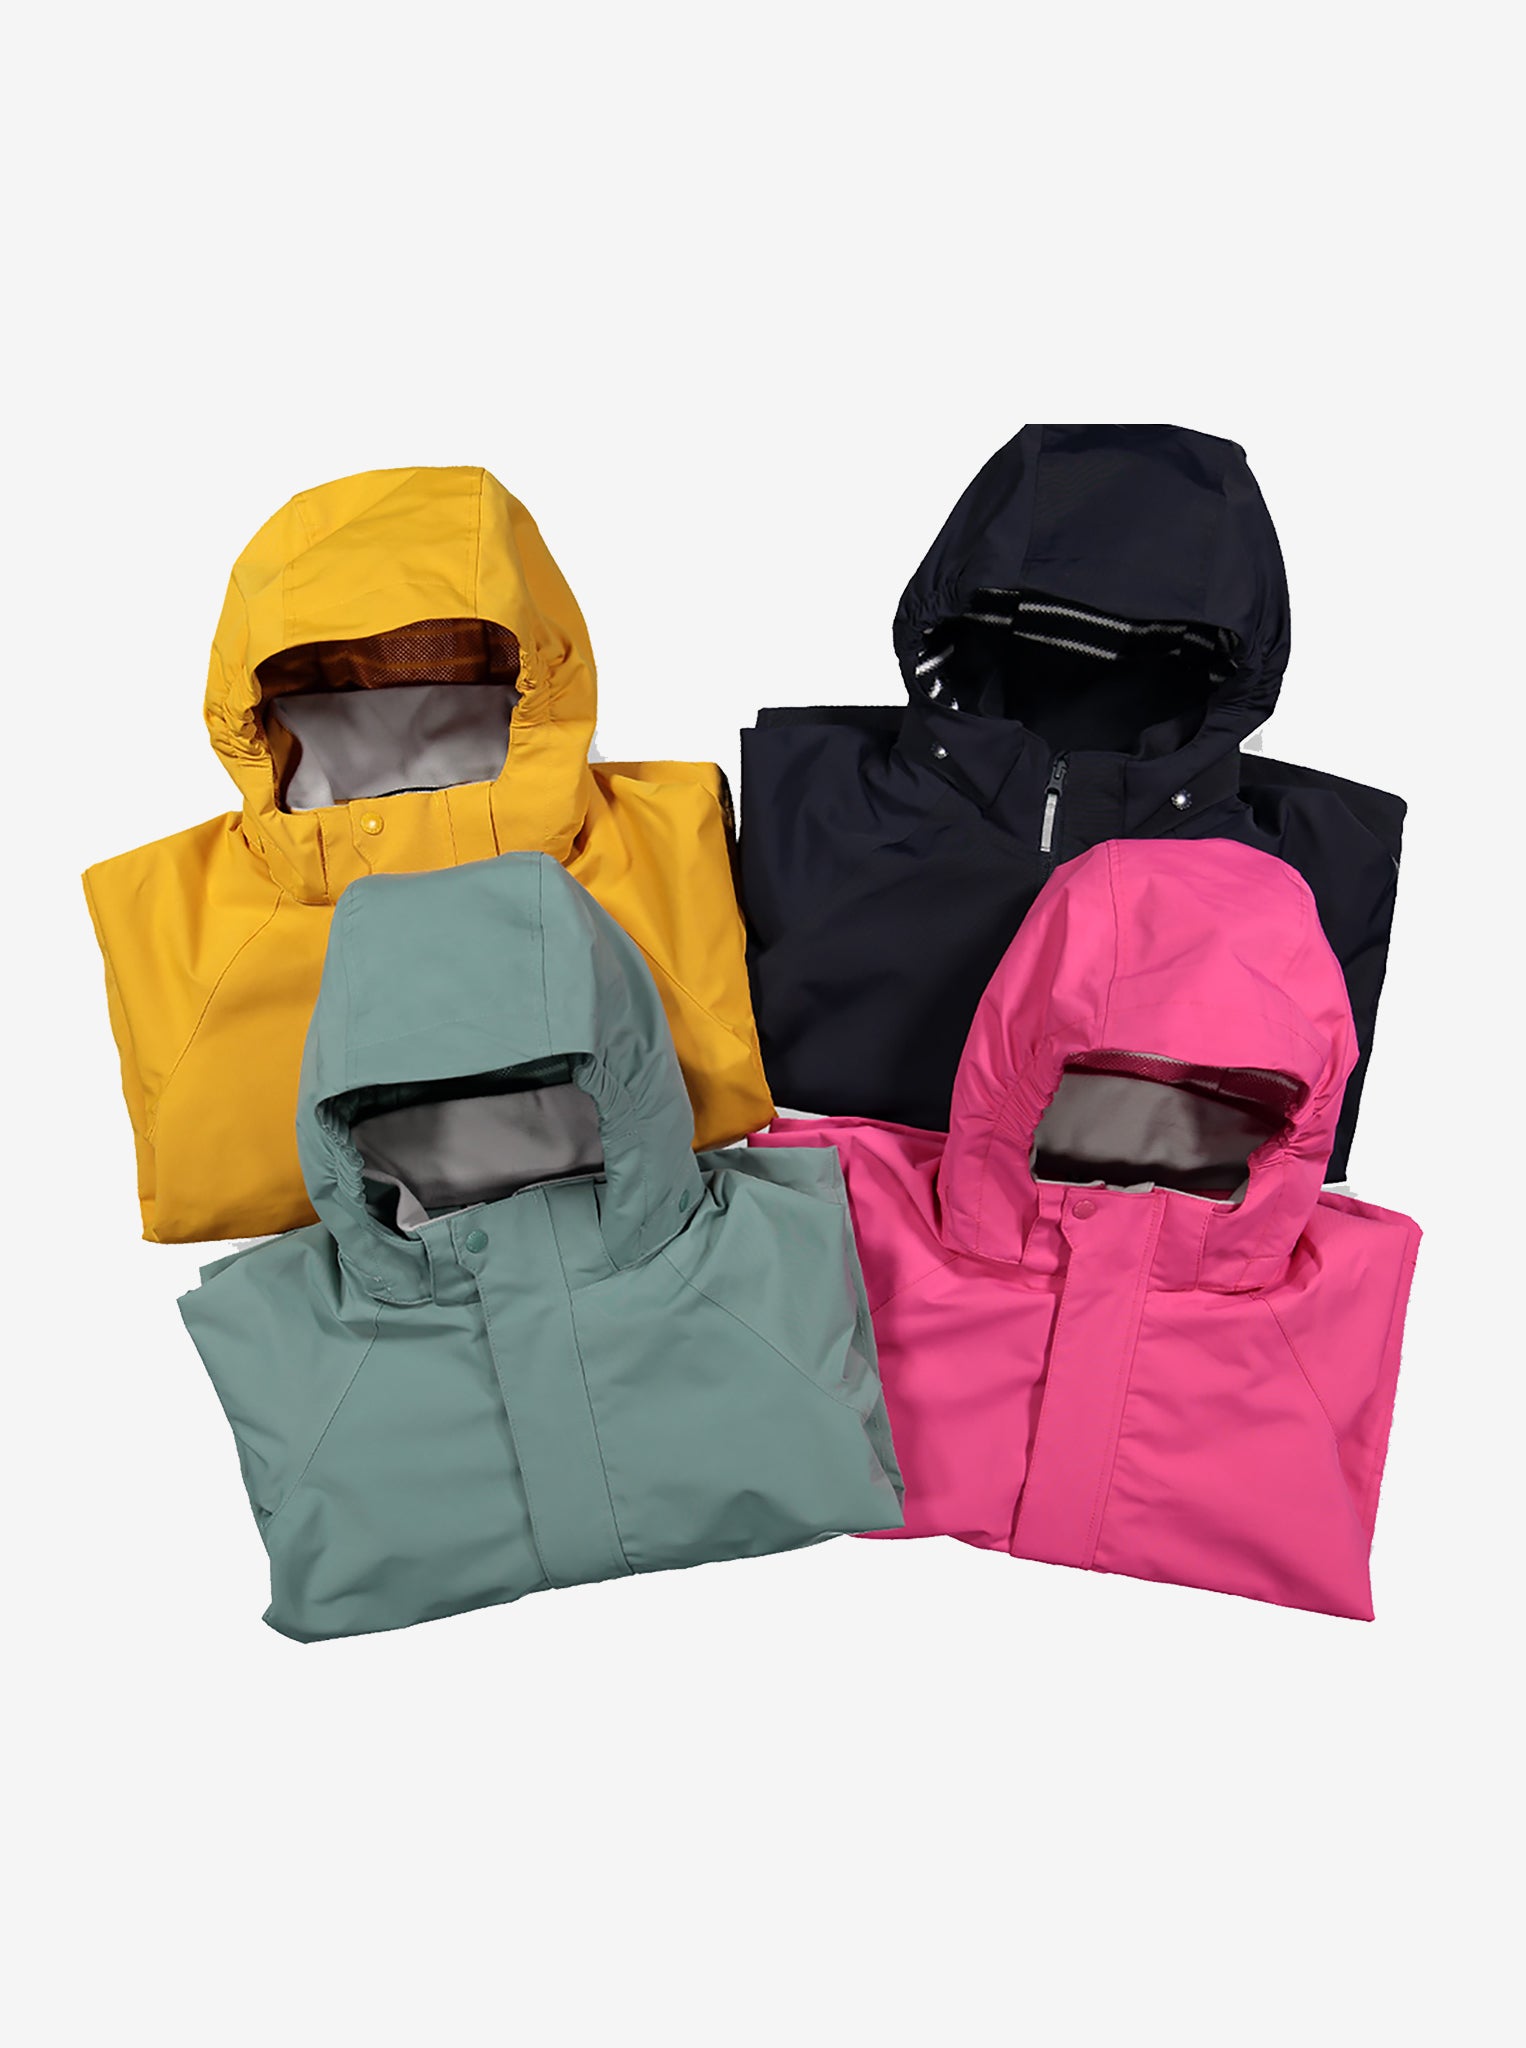 Four kids waterproof shell jackets, comes in the colours yellow, navy, green, and pink, made of lightweight fabric.